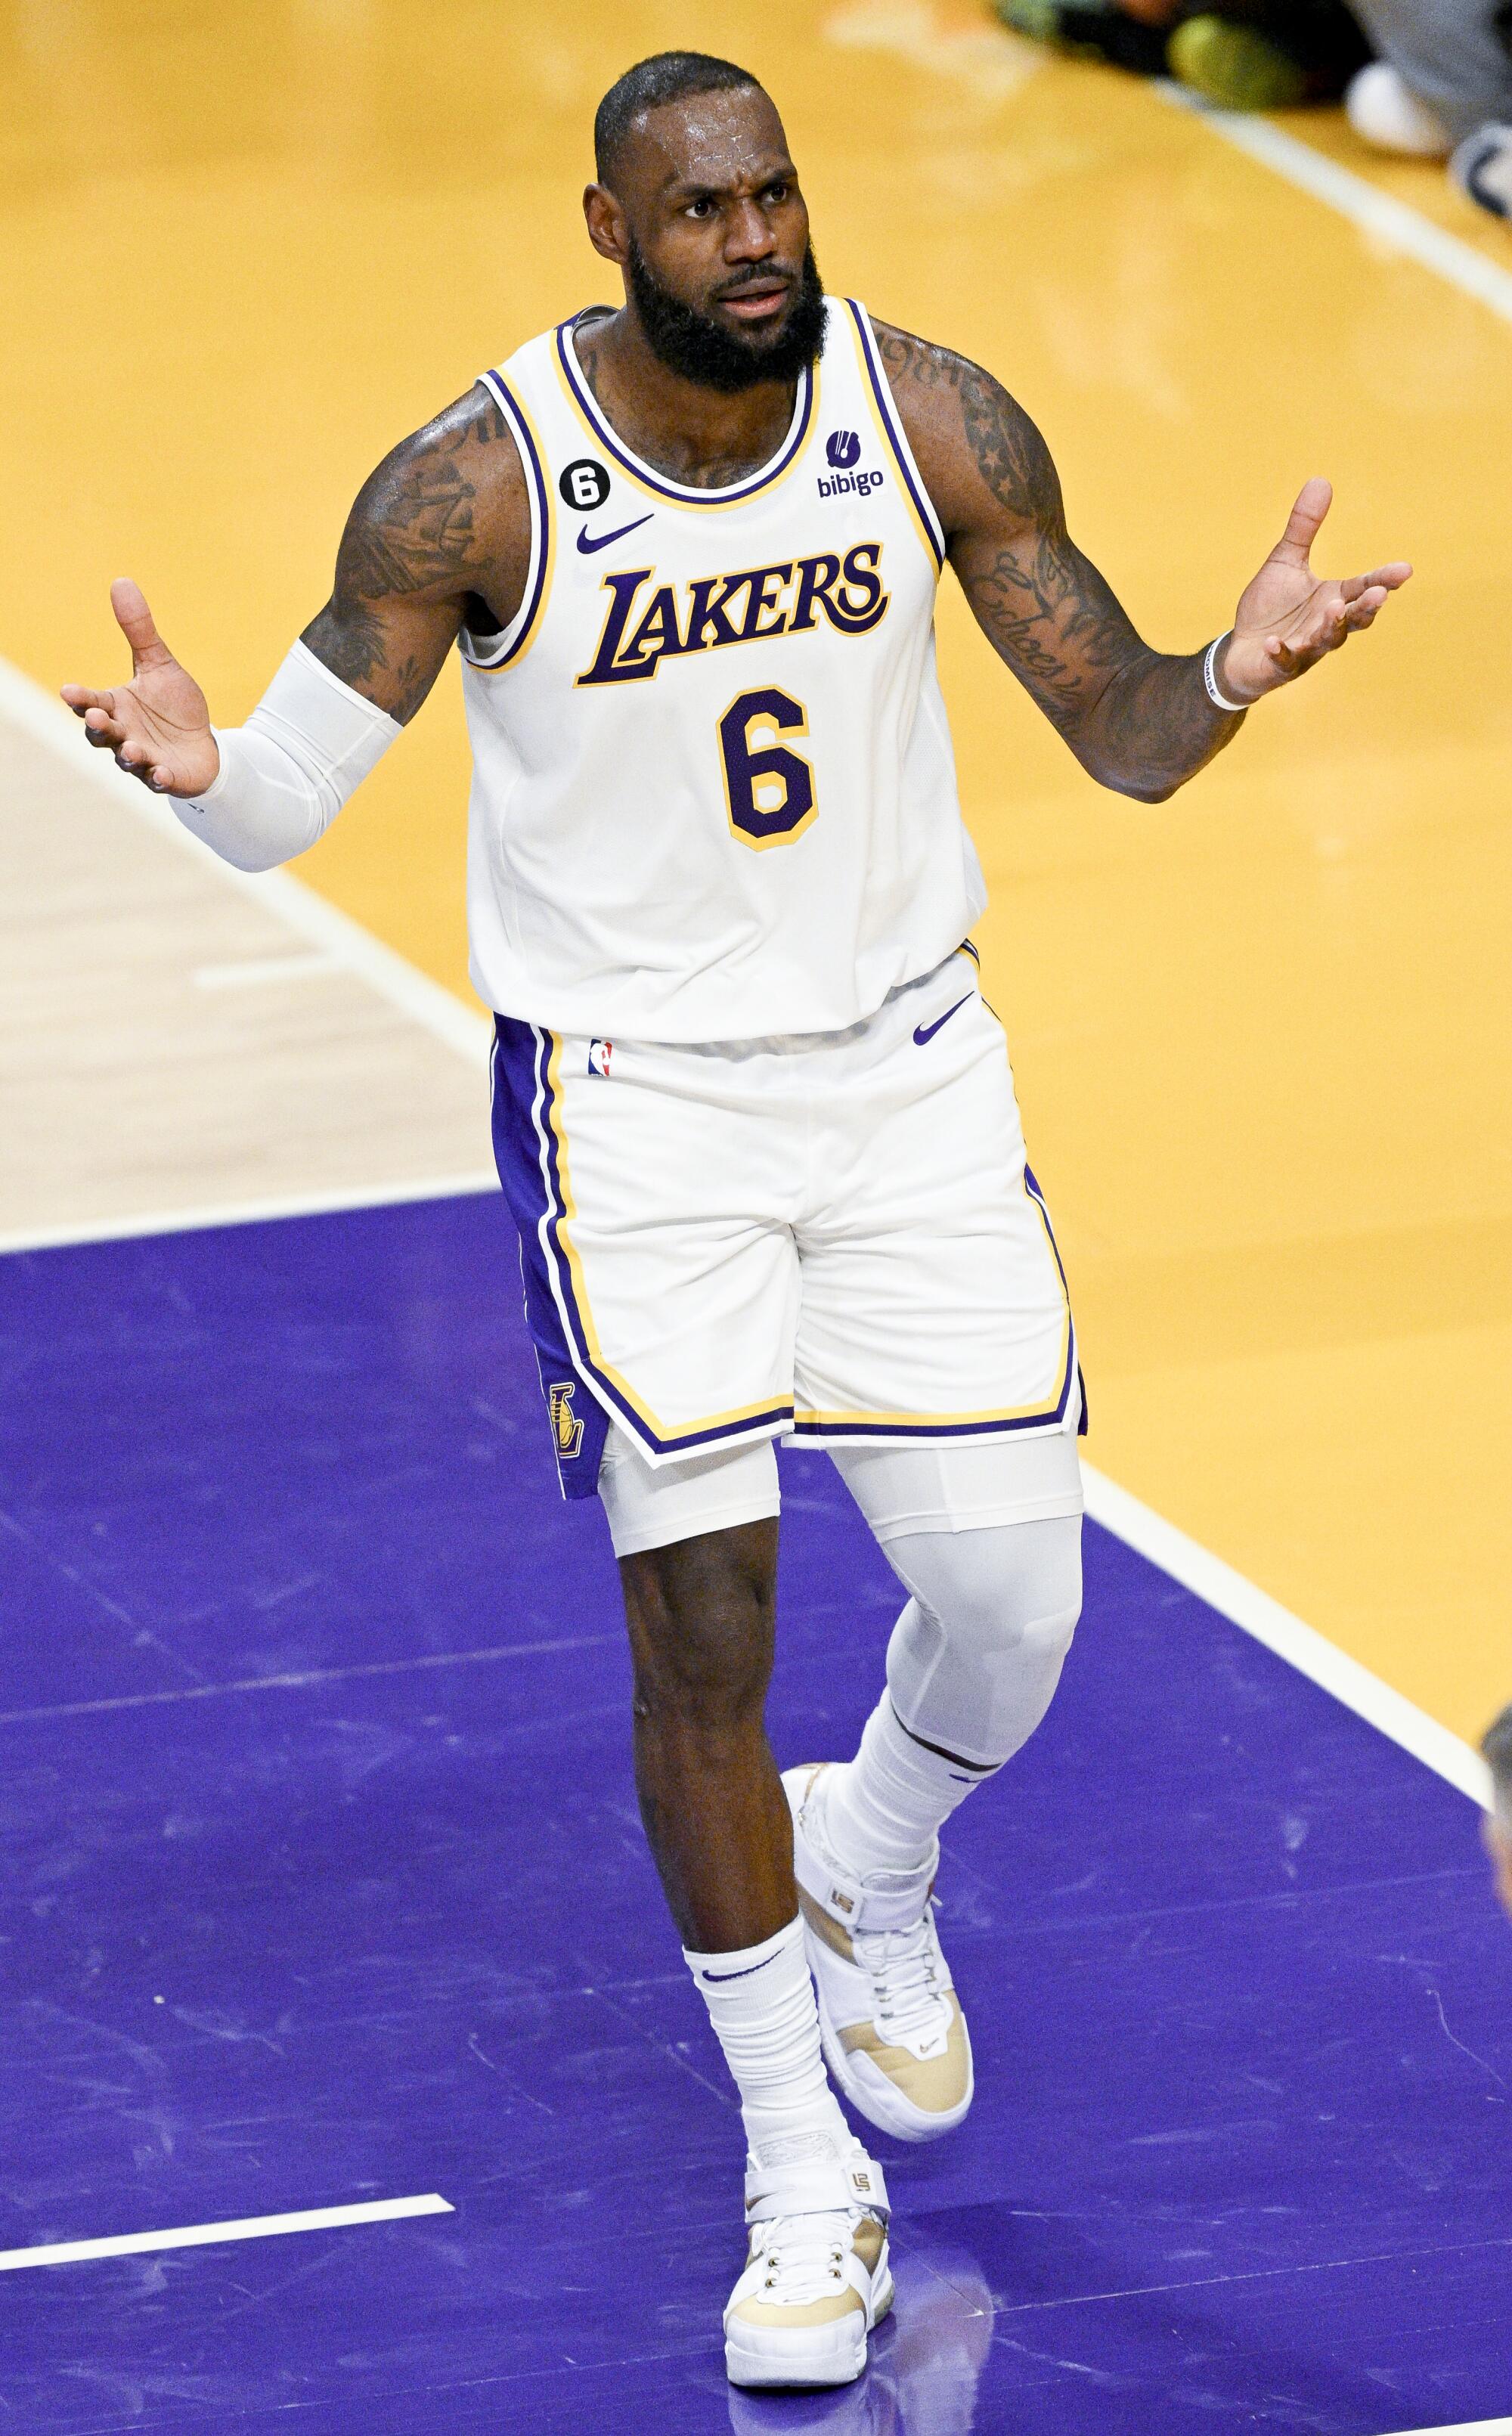 Lakers forward LeBron James reacts to a foul call during the second quarter.